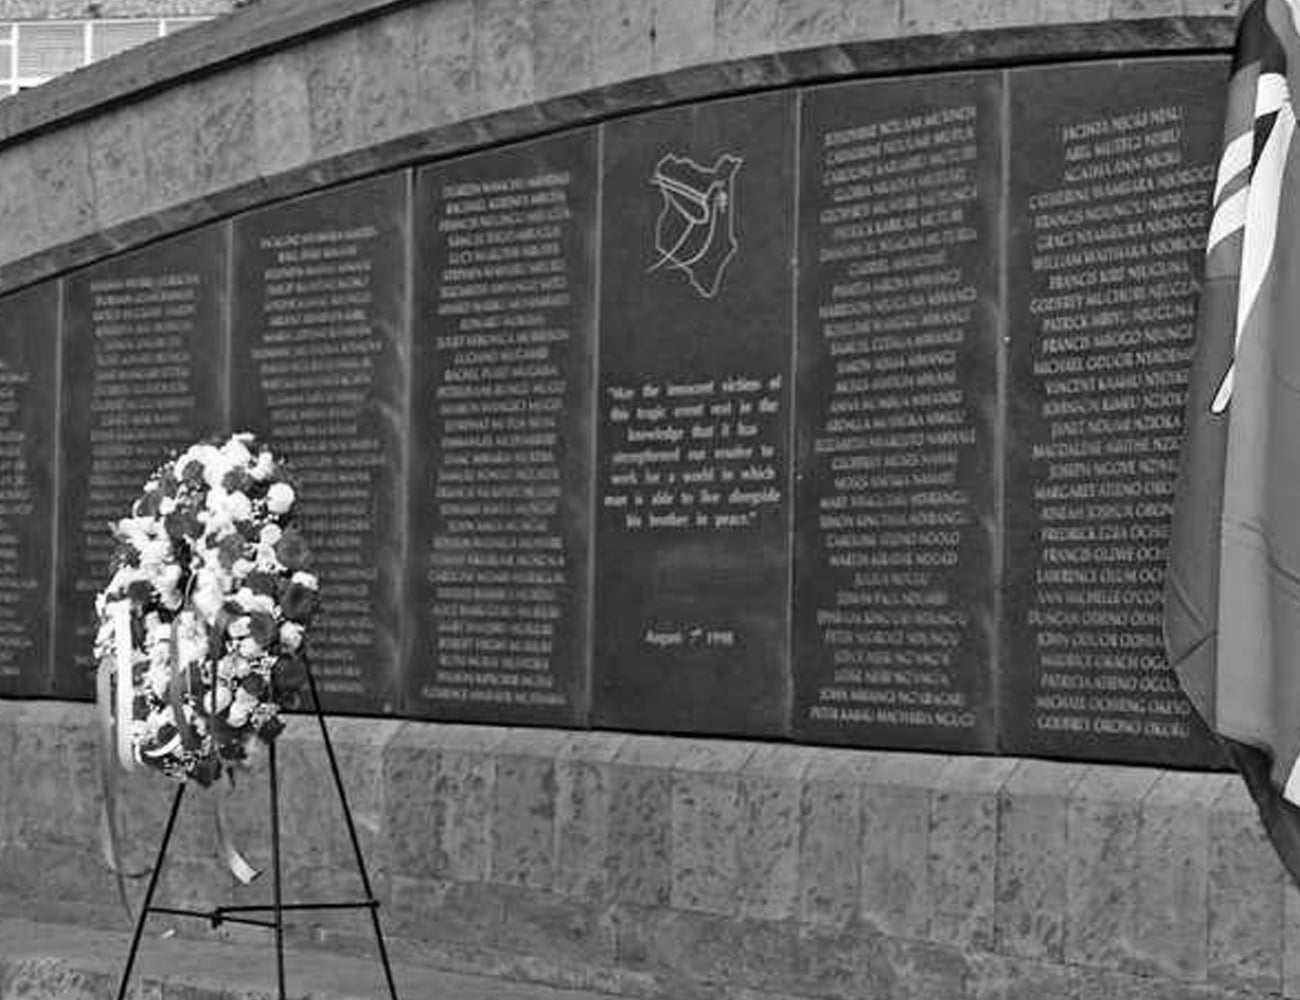 Memorial Site for Victims of the Us Embassy Bombings